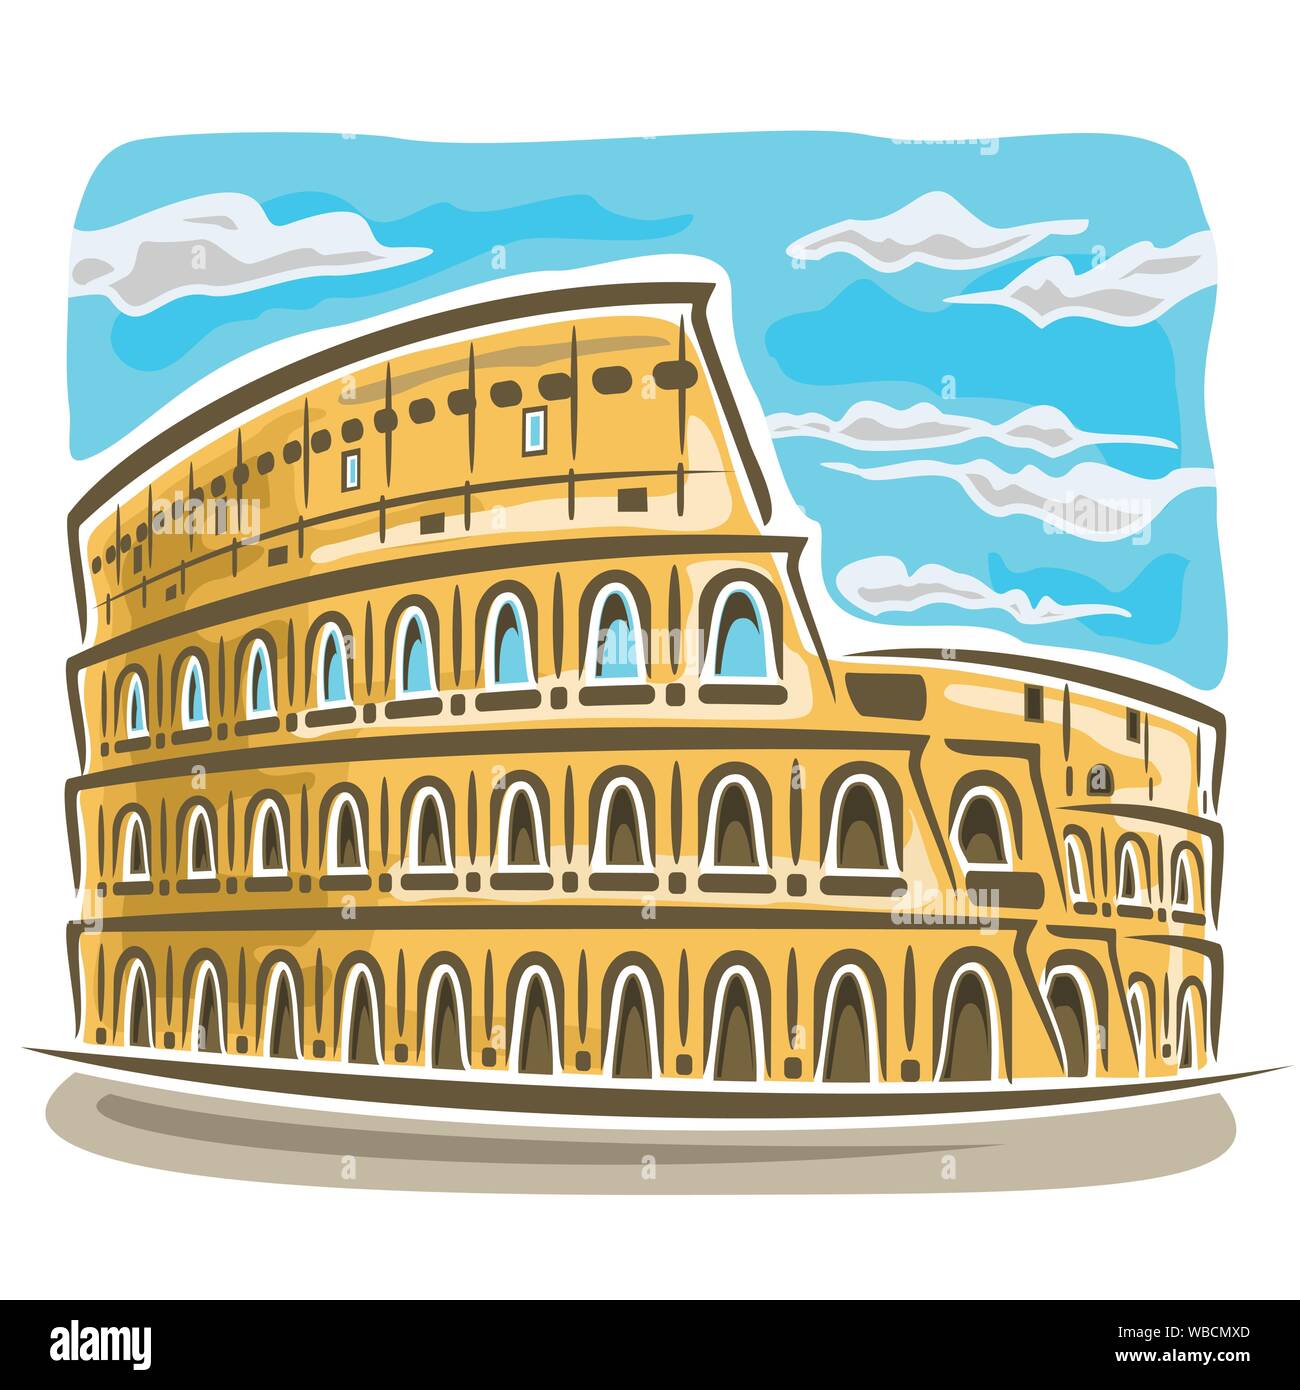 Vector illustration of Coliseum in Rome on blue sky background with clouds. Roman arena for gladiatorial fights. Stock Vector